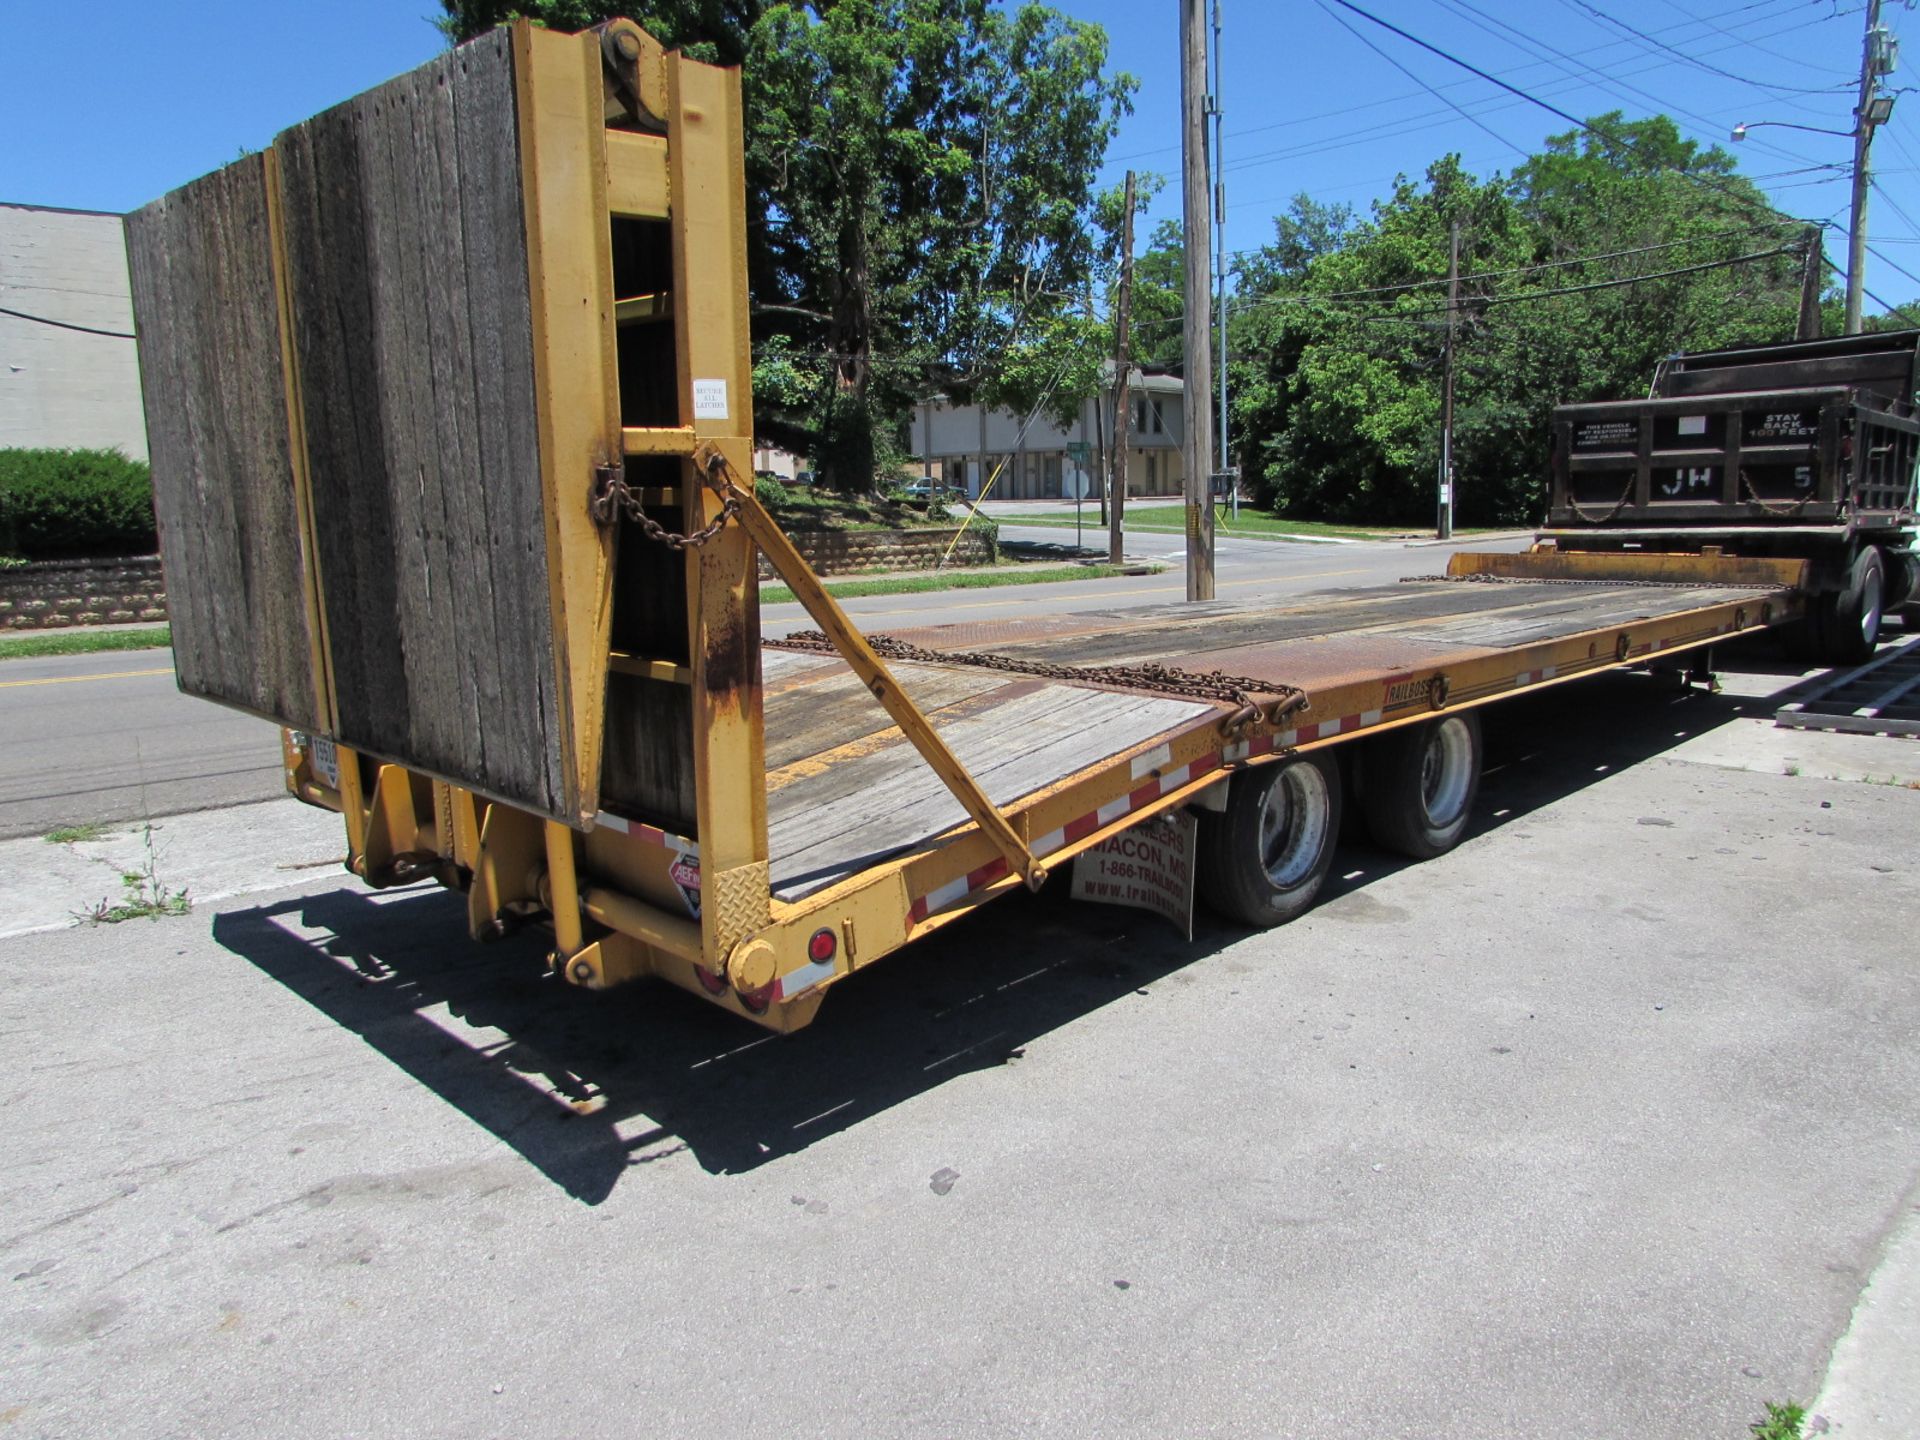 2002 Trail Boss 20-Ton Paver Trailer, Electric Brakes, Hydraulic Ramps, S/N 4S0DP302921000735 - Image 4 of 4